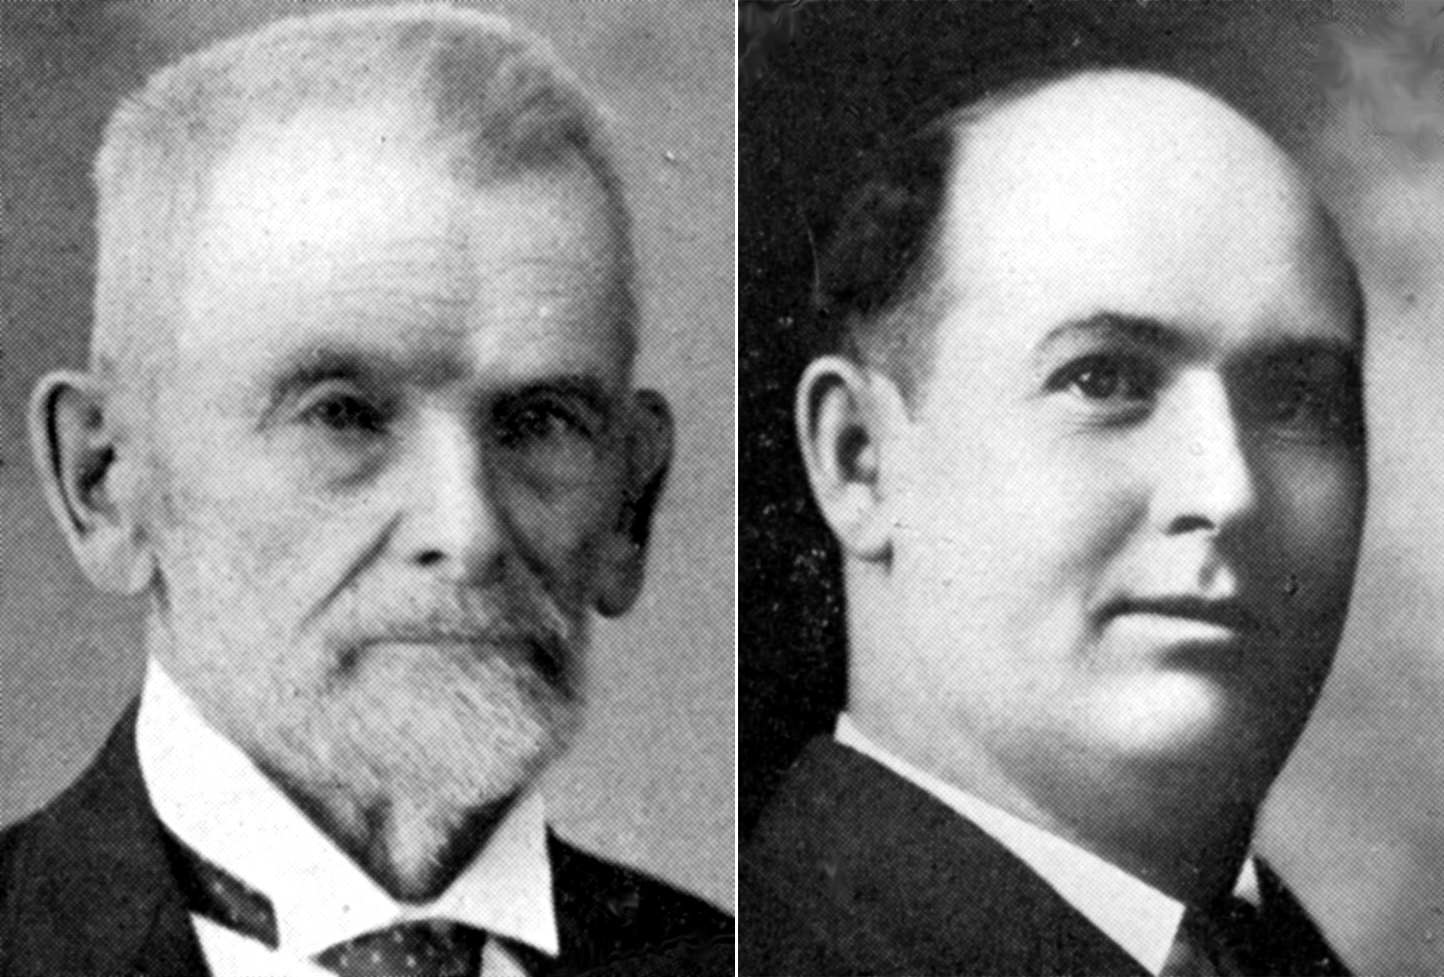 Charles P. Goodrich and William D. James, who formed and grew the Jamesway Manufacturing Company, in Kent, Ohio.